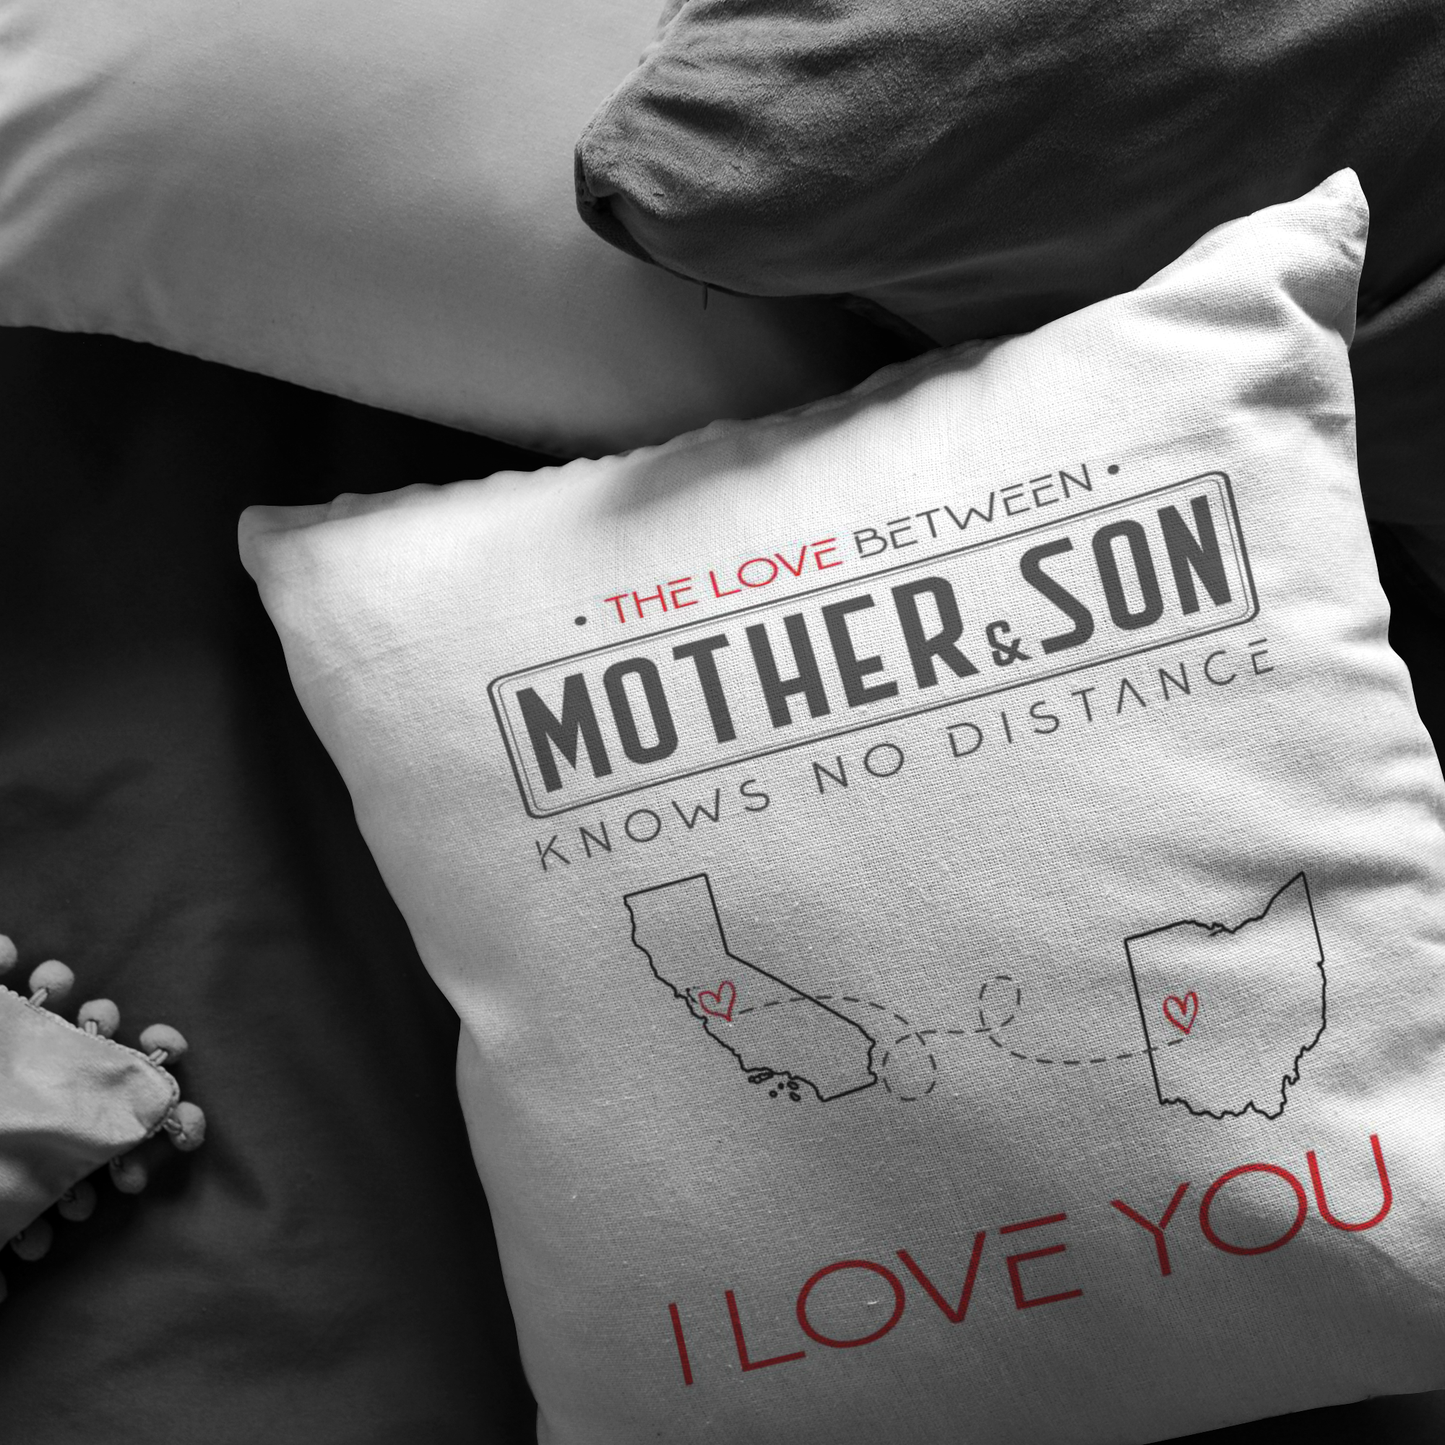 ND-pl20419406-sp-22227 - Mothers Day Gifts For Mom - The Love Between Mother  Son K